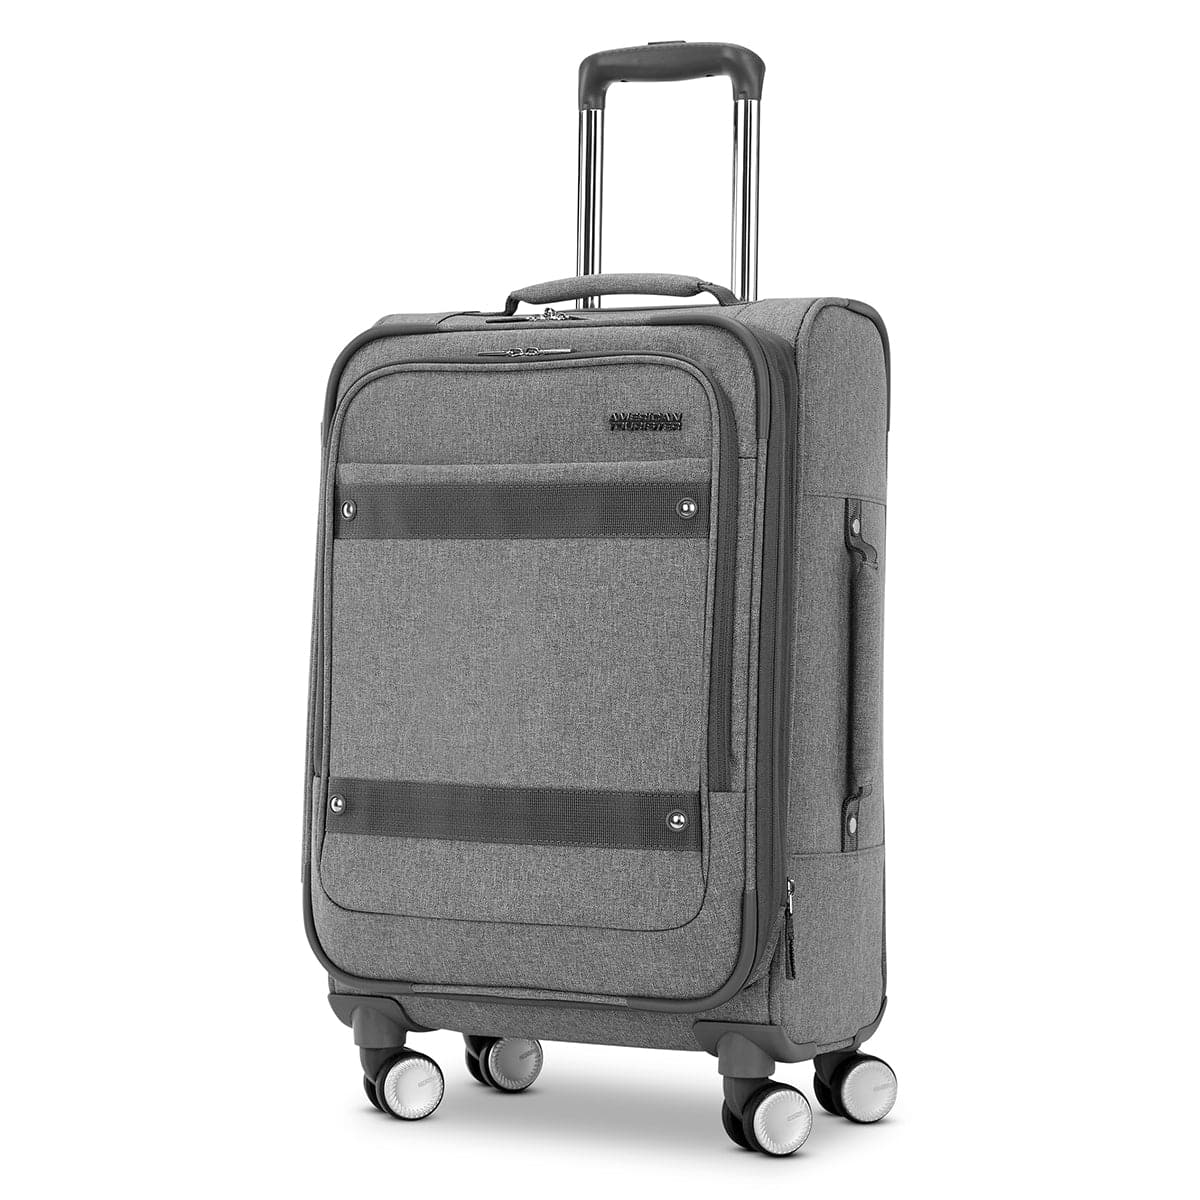 American Tourister Whim 21" Spinner